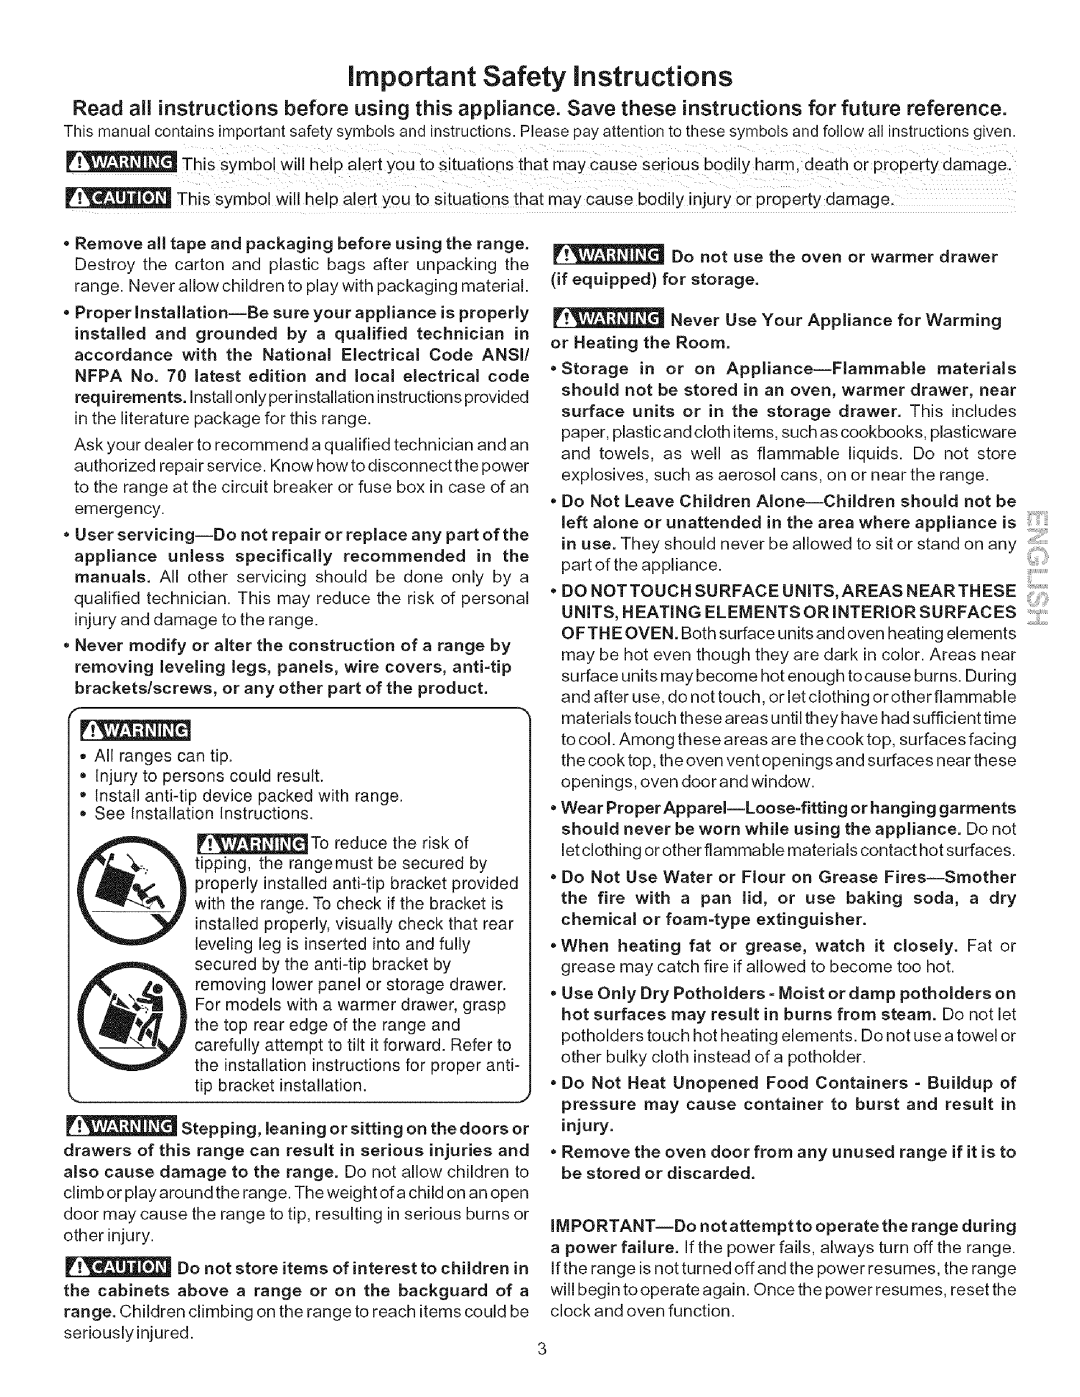 Kenmore 790-.9663, 9664 manual partoftheapp,ance, important Safety instructions 